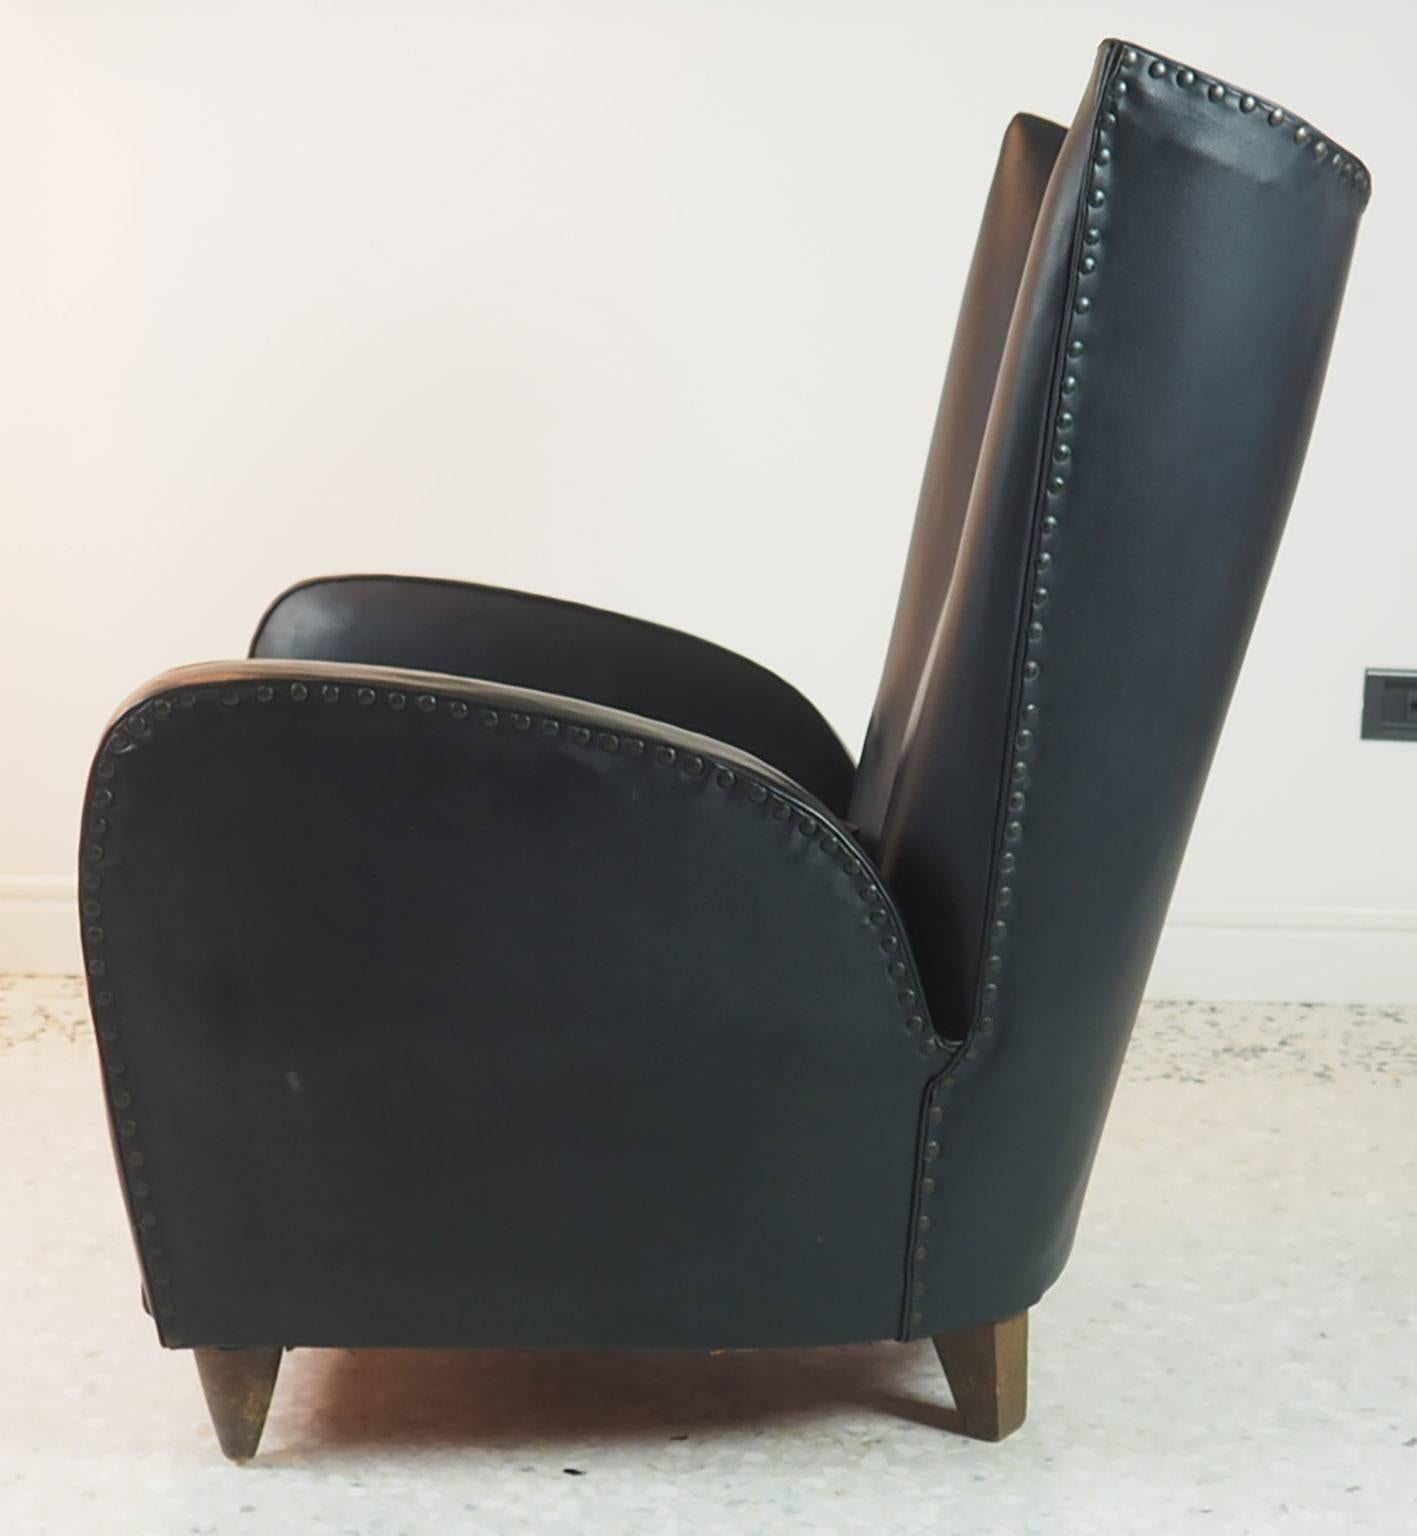 Pair of fine Paolo Buffa armchairs produced in Italy in 1950 with its original faux dark green leather cover.
Very good original condition, the cover is perfect without damage. The back is Oki, the seat has lost its natural elasticity but can be